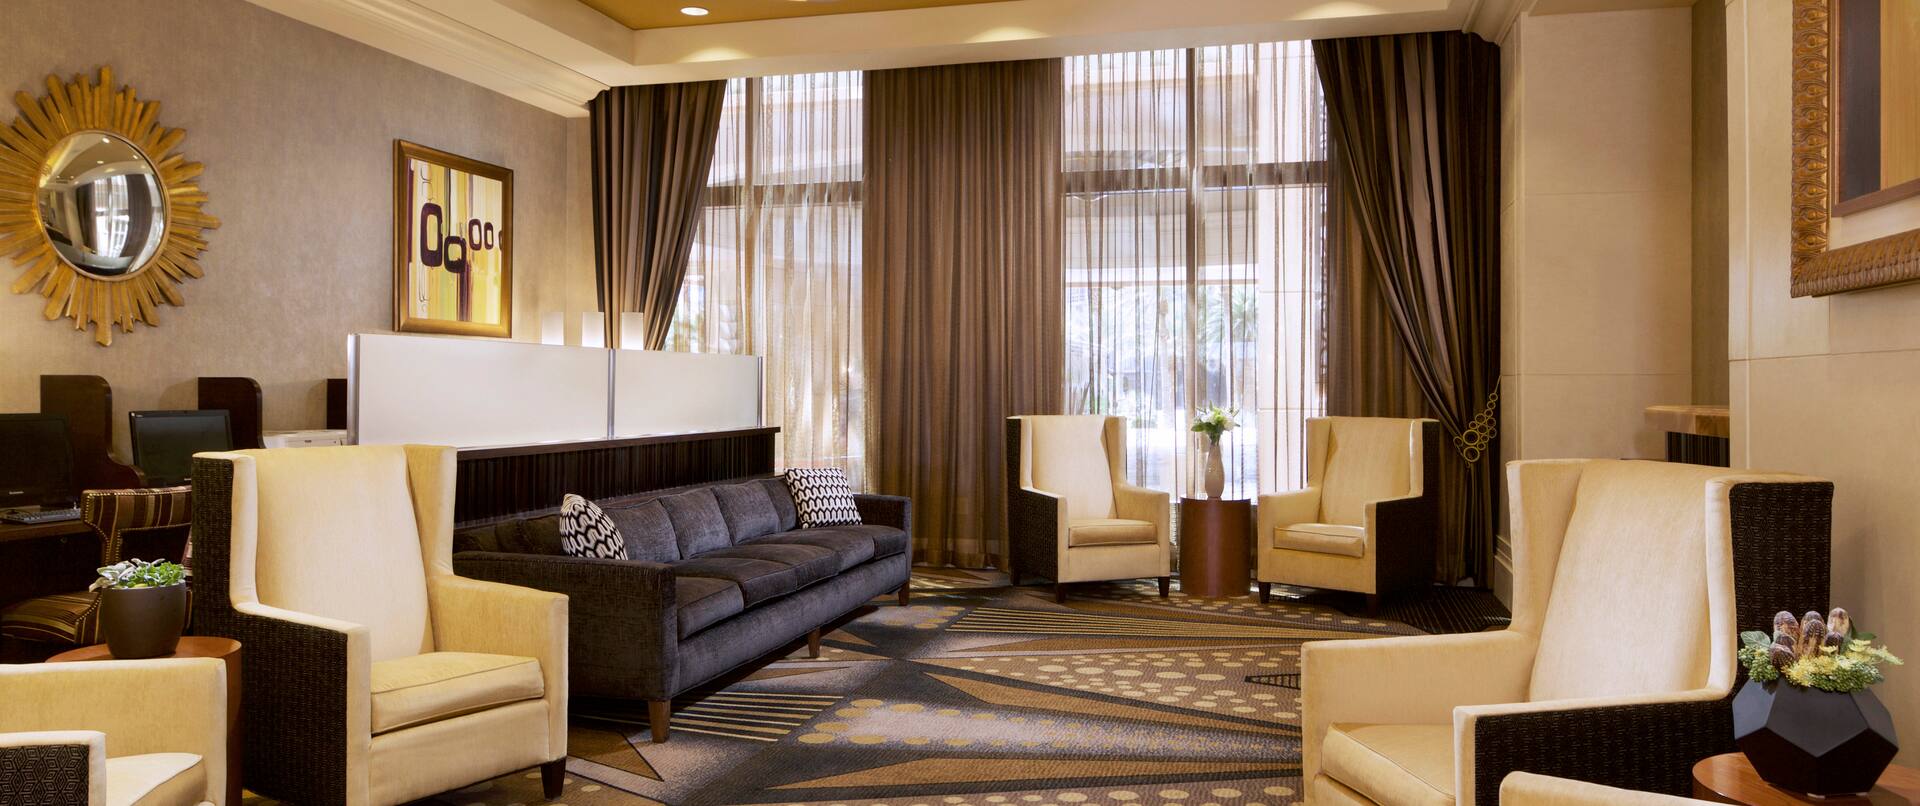 Hilton Grand Vacations Suites on the Las Vegas Strip, NV Hotels - Lobby Seating with Windows